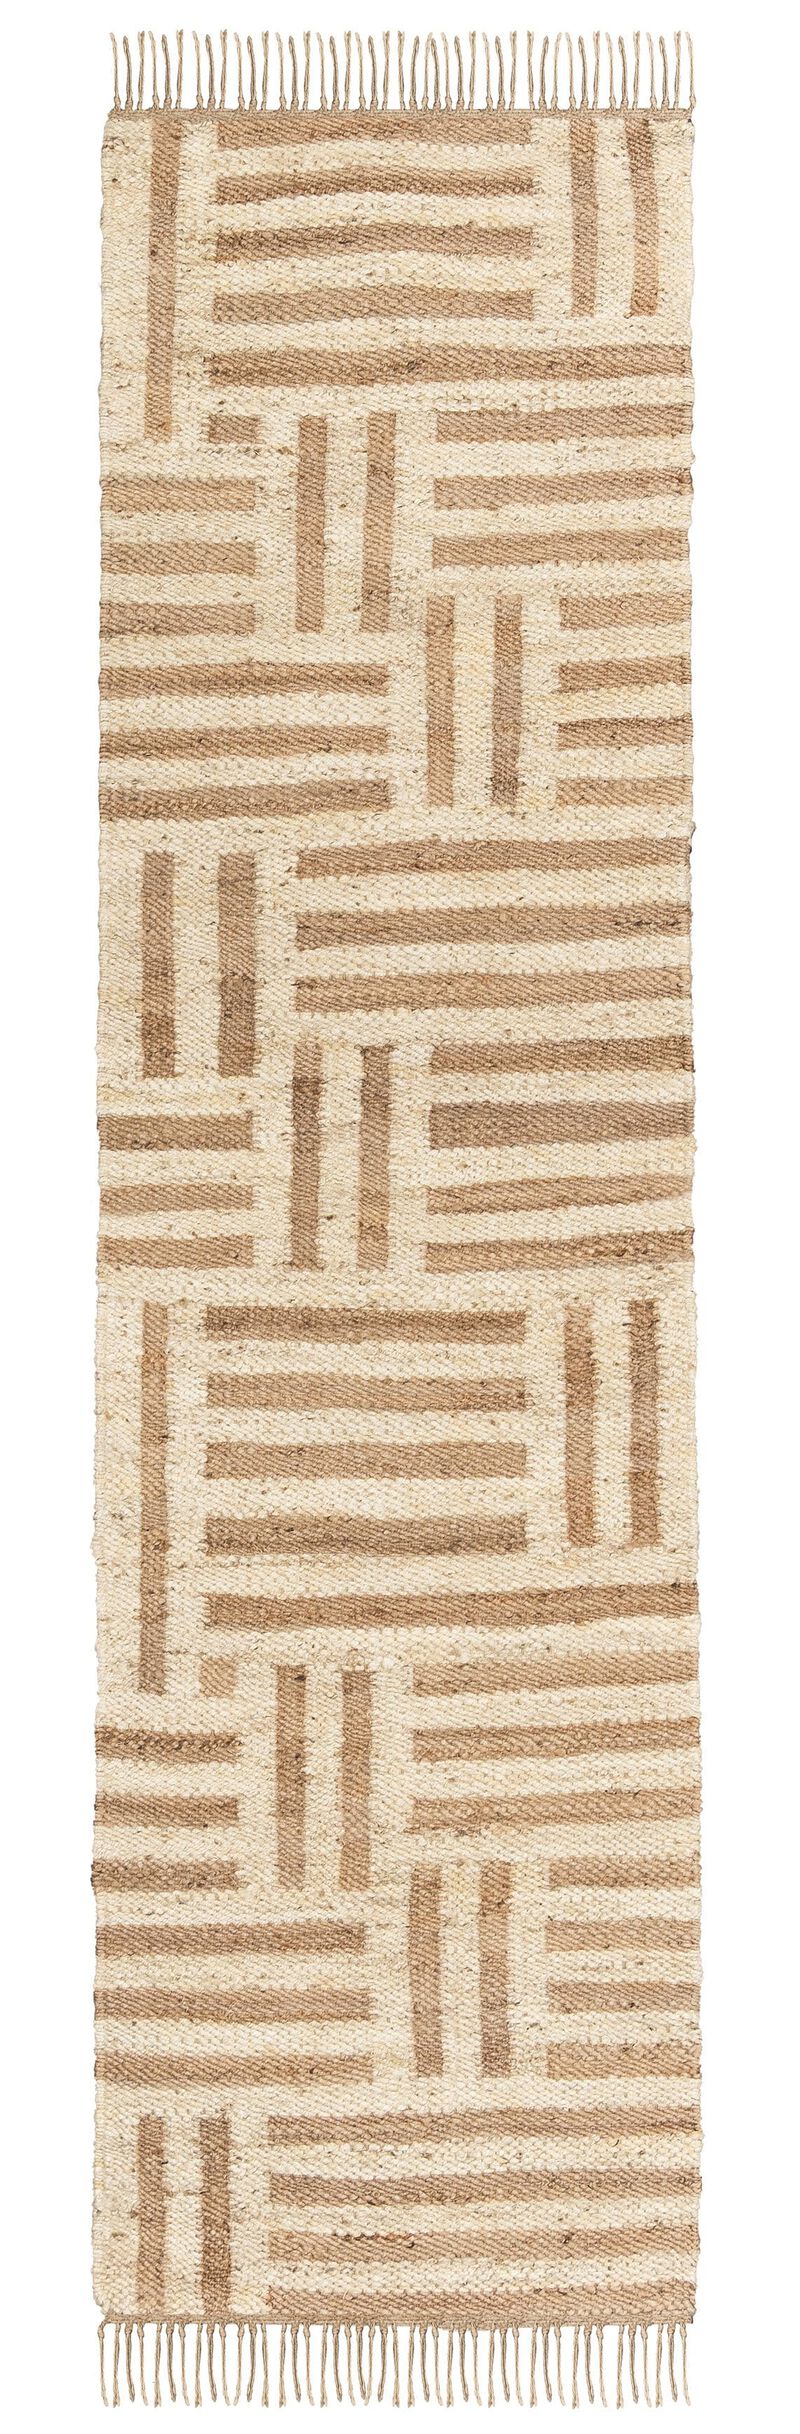 Abbie Natural and Bleached Striped Geometric Jute Runner Rug image number 1